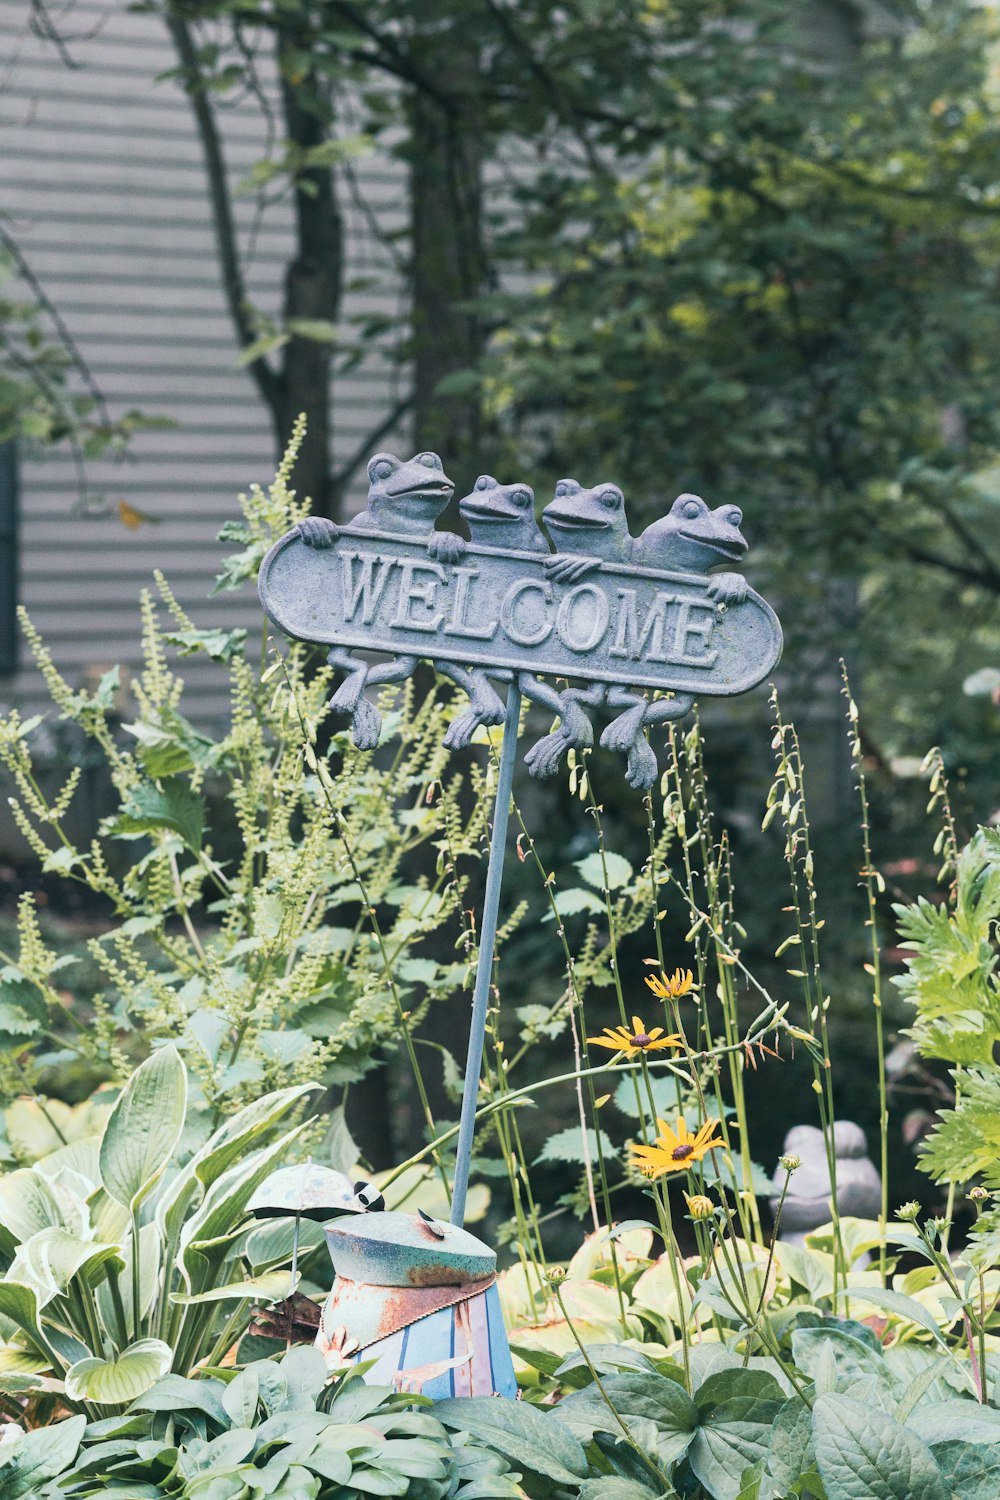 a welcome sign in the middle of a garden